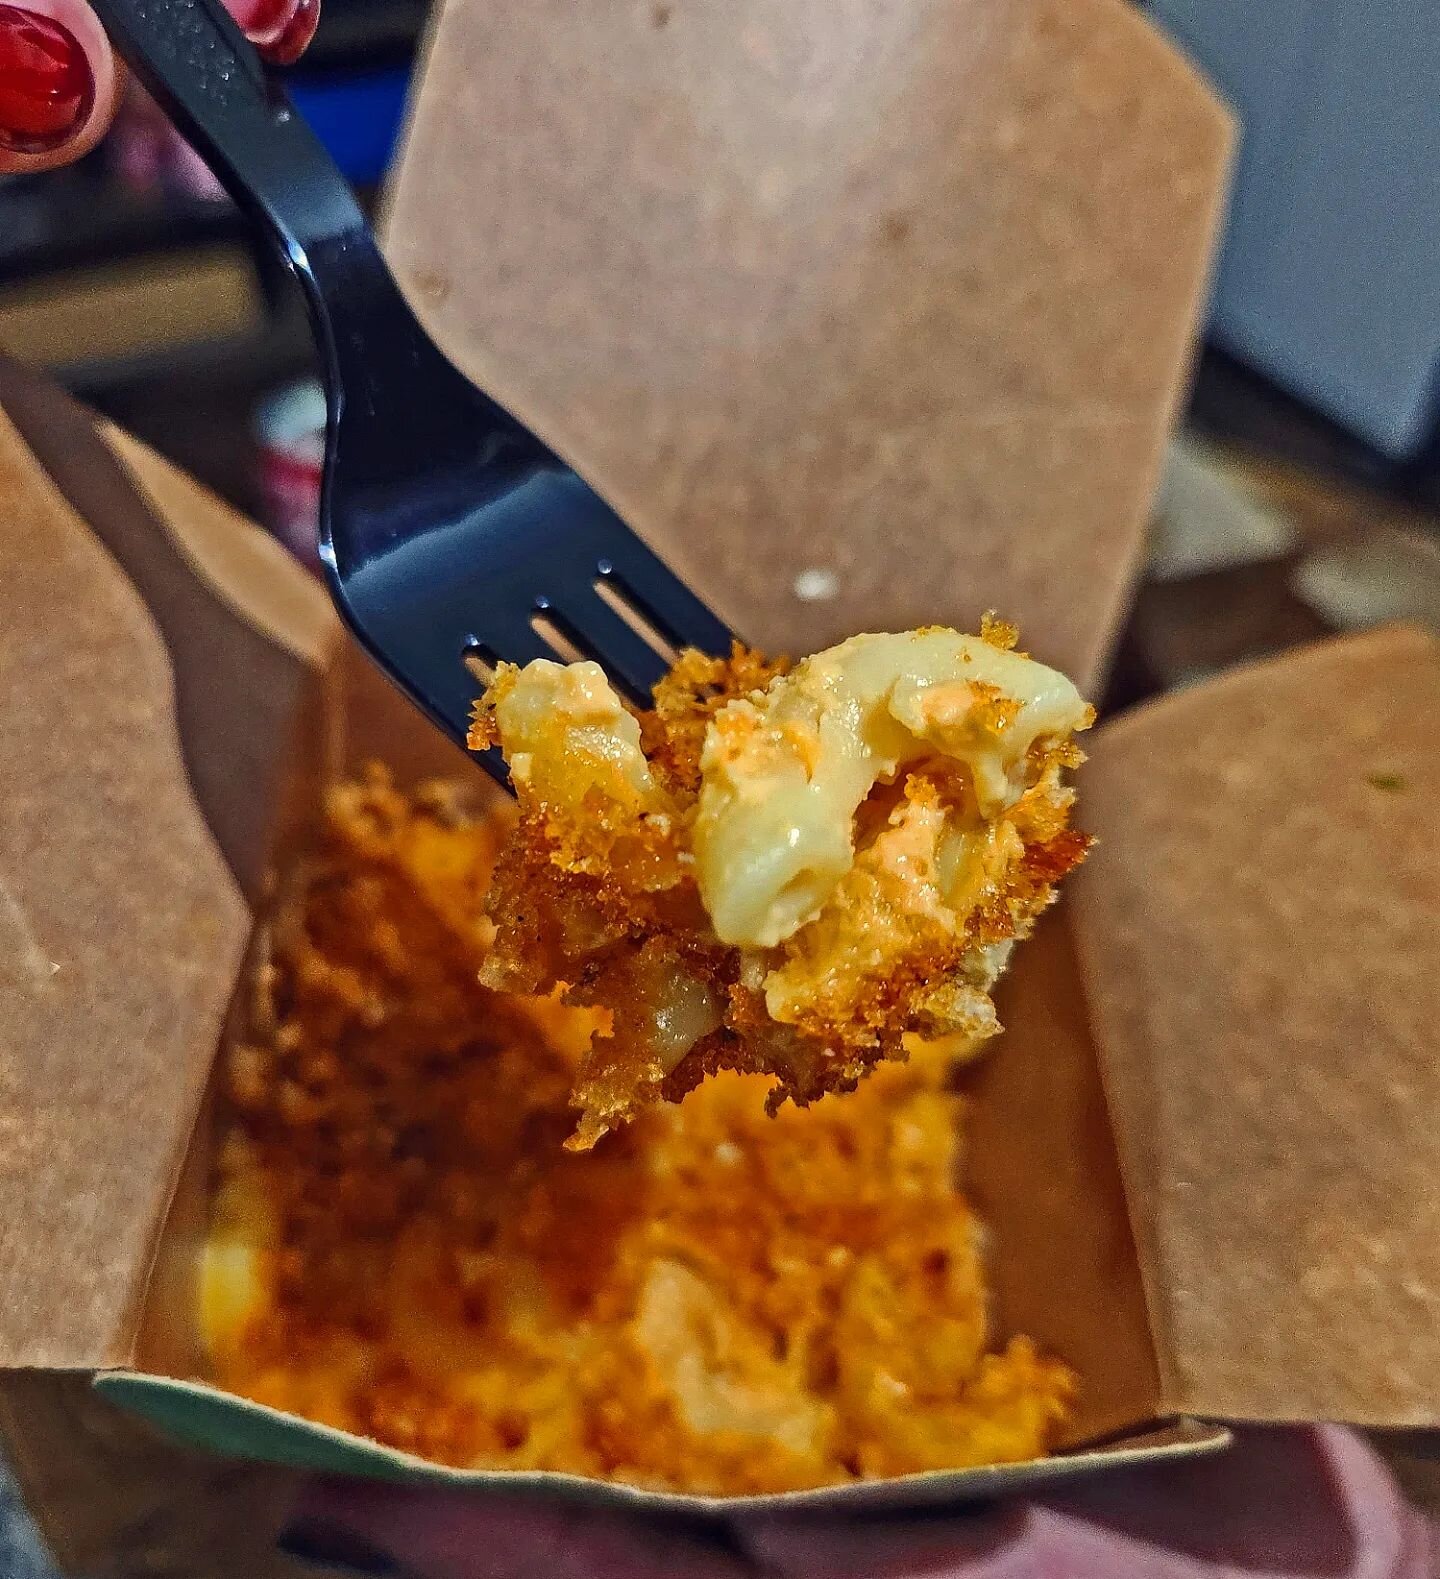 I tried Nando's new Peri Mac, and it's all love 💕 The breaded crust is made from their signature garlic bread, and its sooo craveable ✨️🔥 Thank you @nandoscanada and @yelptoronto for the invite 💖
.
.
.
.
.

#food #foodie #foodpics #foodporn #yelpe